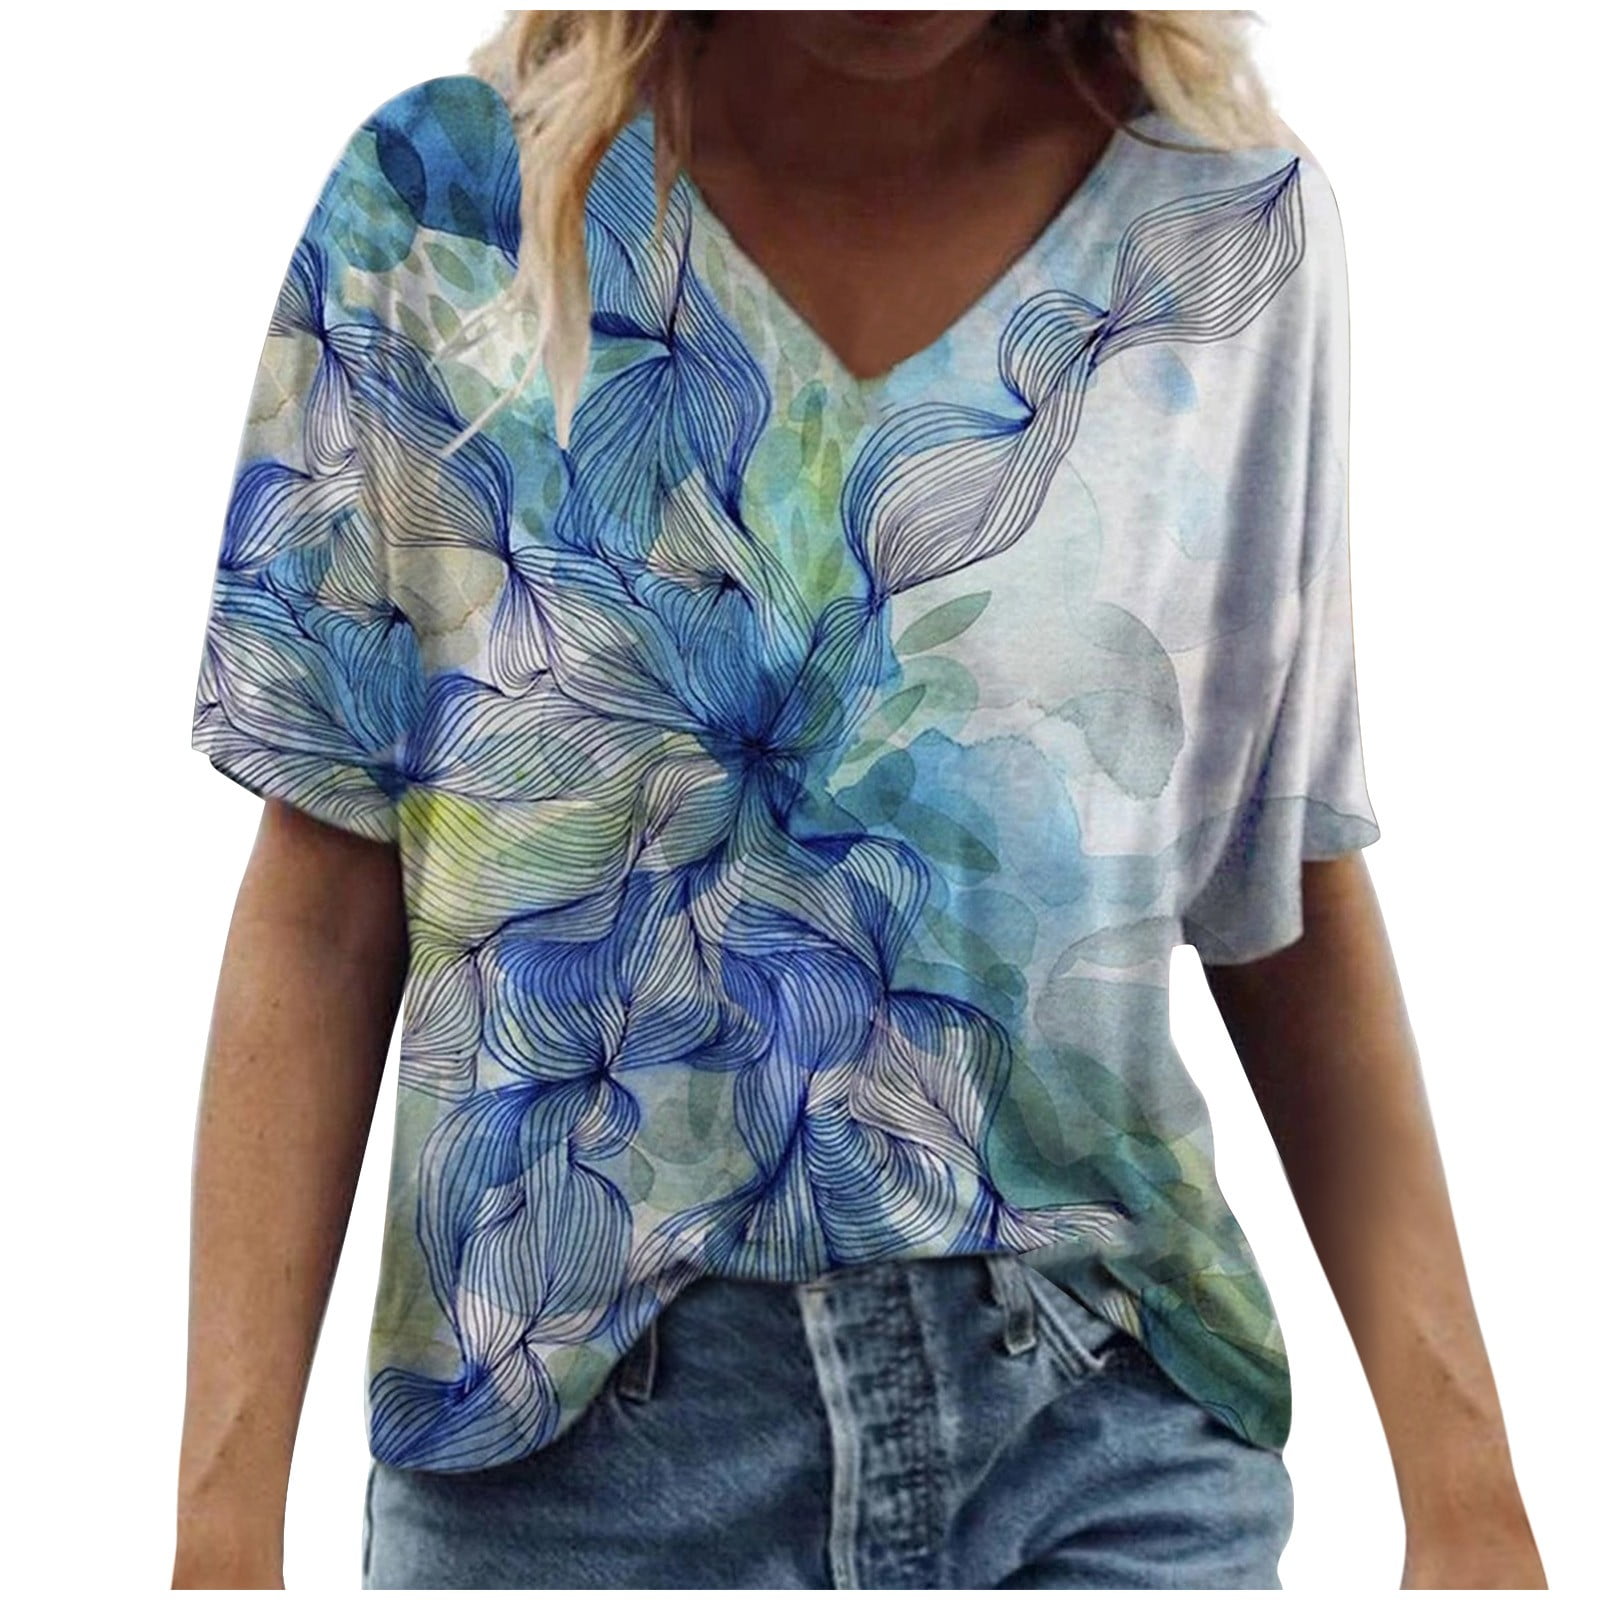 ORT Blouse for Women,Womens Summer Tshirt V Neck Short Sleeve Blouse Tops Floral Printed Tunic Loose Casual Comfy Beach Tee